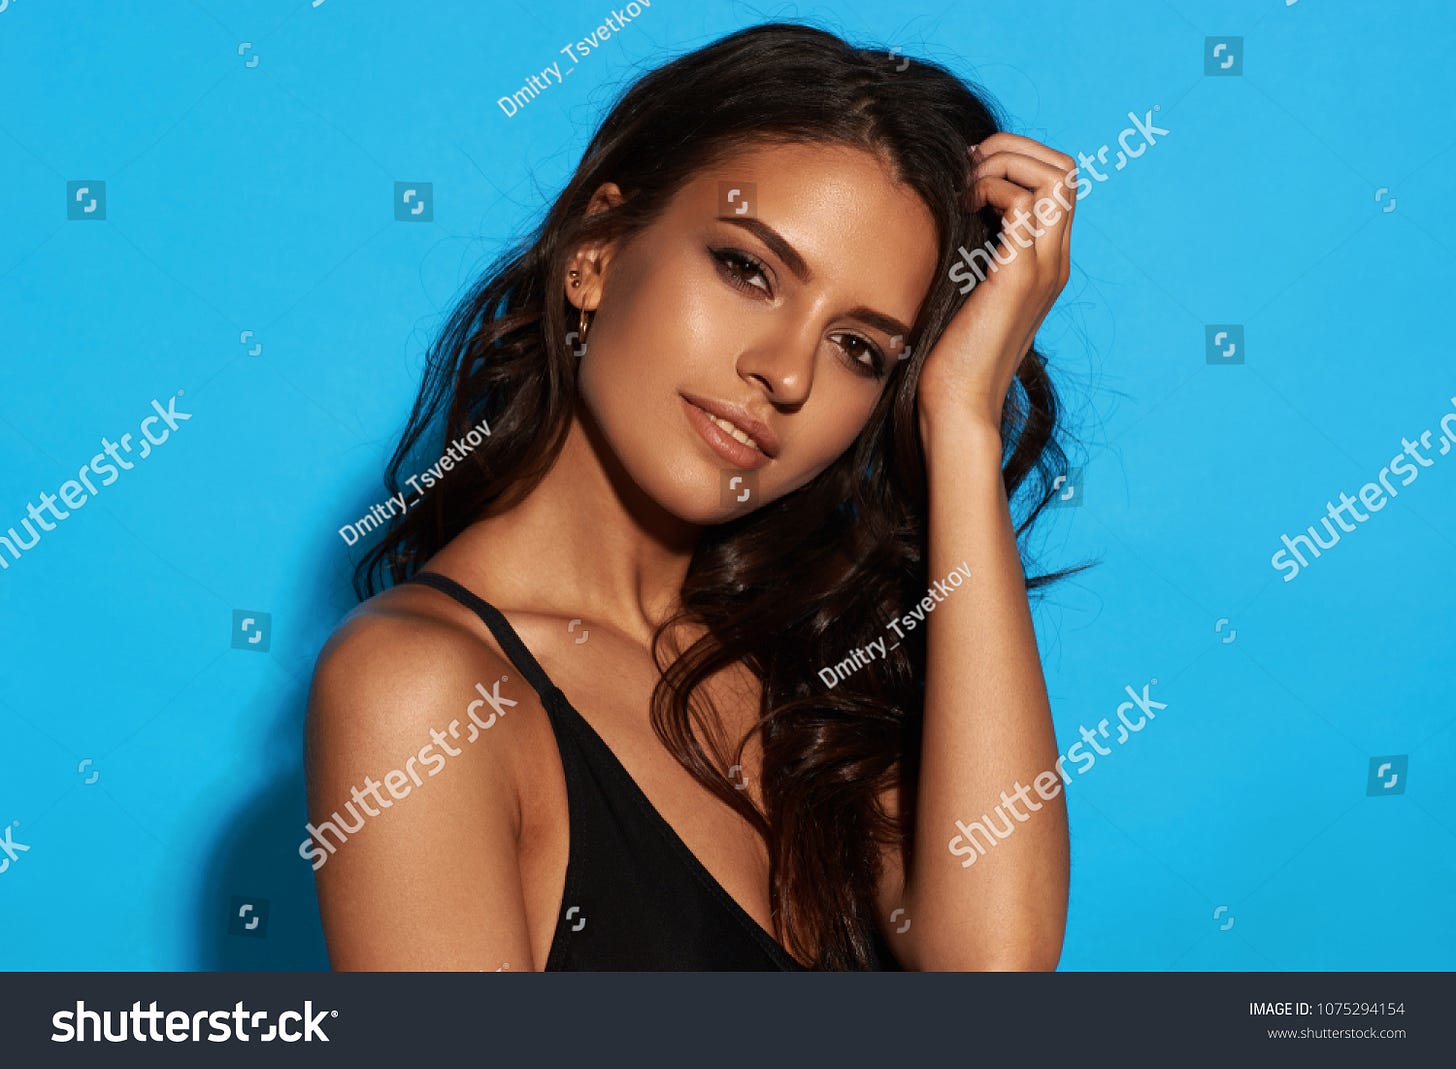 1,337,720 Tanning Images, Stock Photos & Vectors | Shutterstock